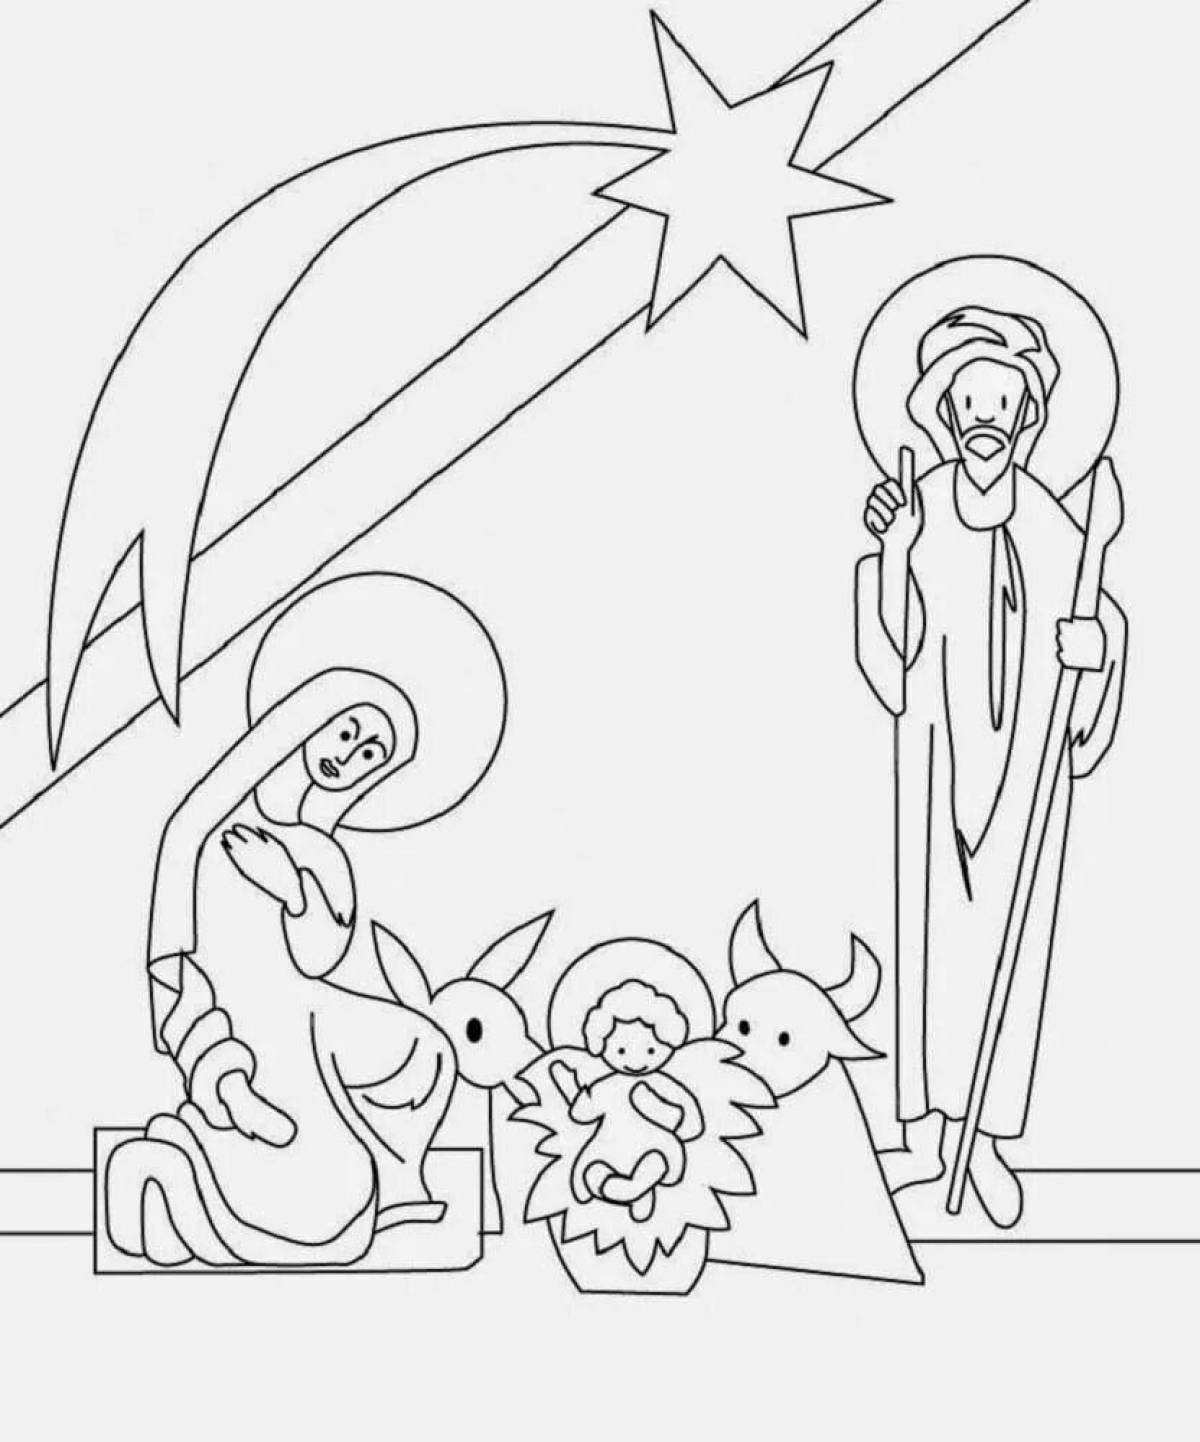 Charming nativity scene coloring book for kids